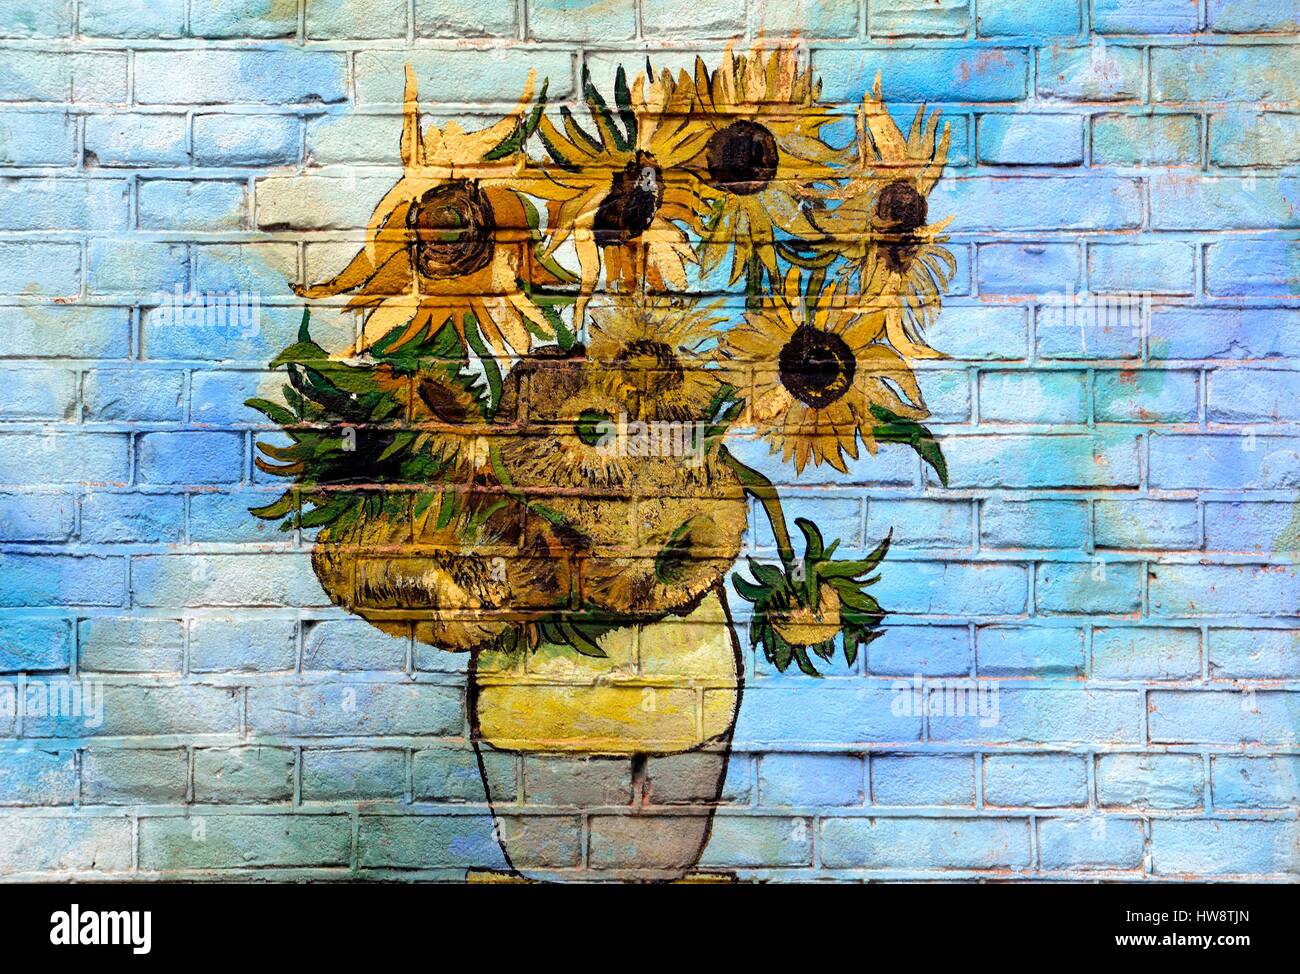 Netherlands, Holland, Amsterdam, reproduction of Van Gogh's sunflowers on the wall of a house Stock Photo